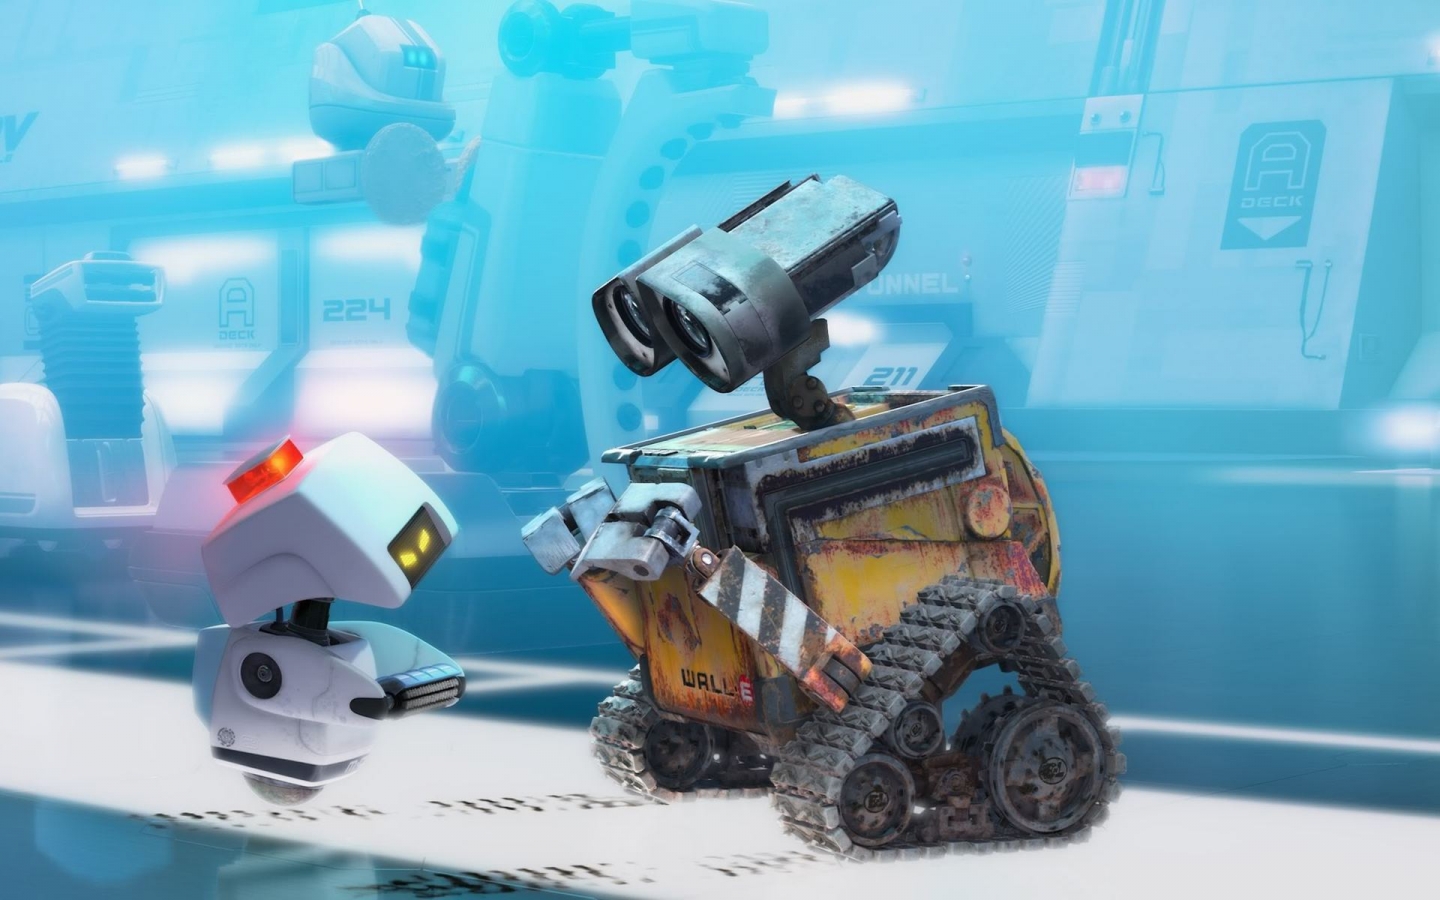 Walle Movie Scene for 1440 x 900 widescreen resolution